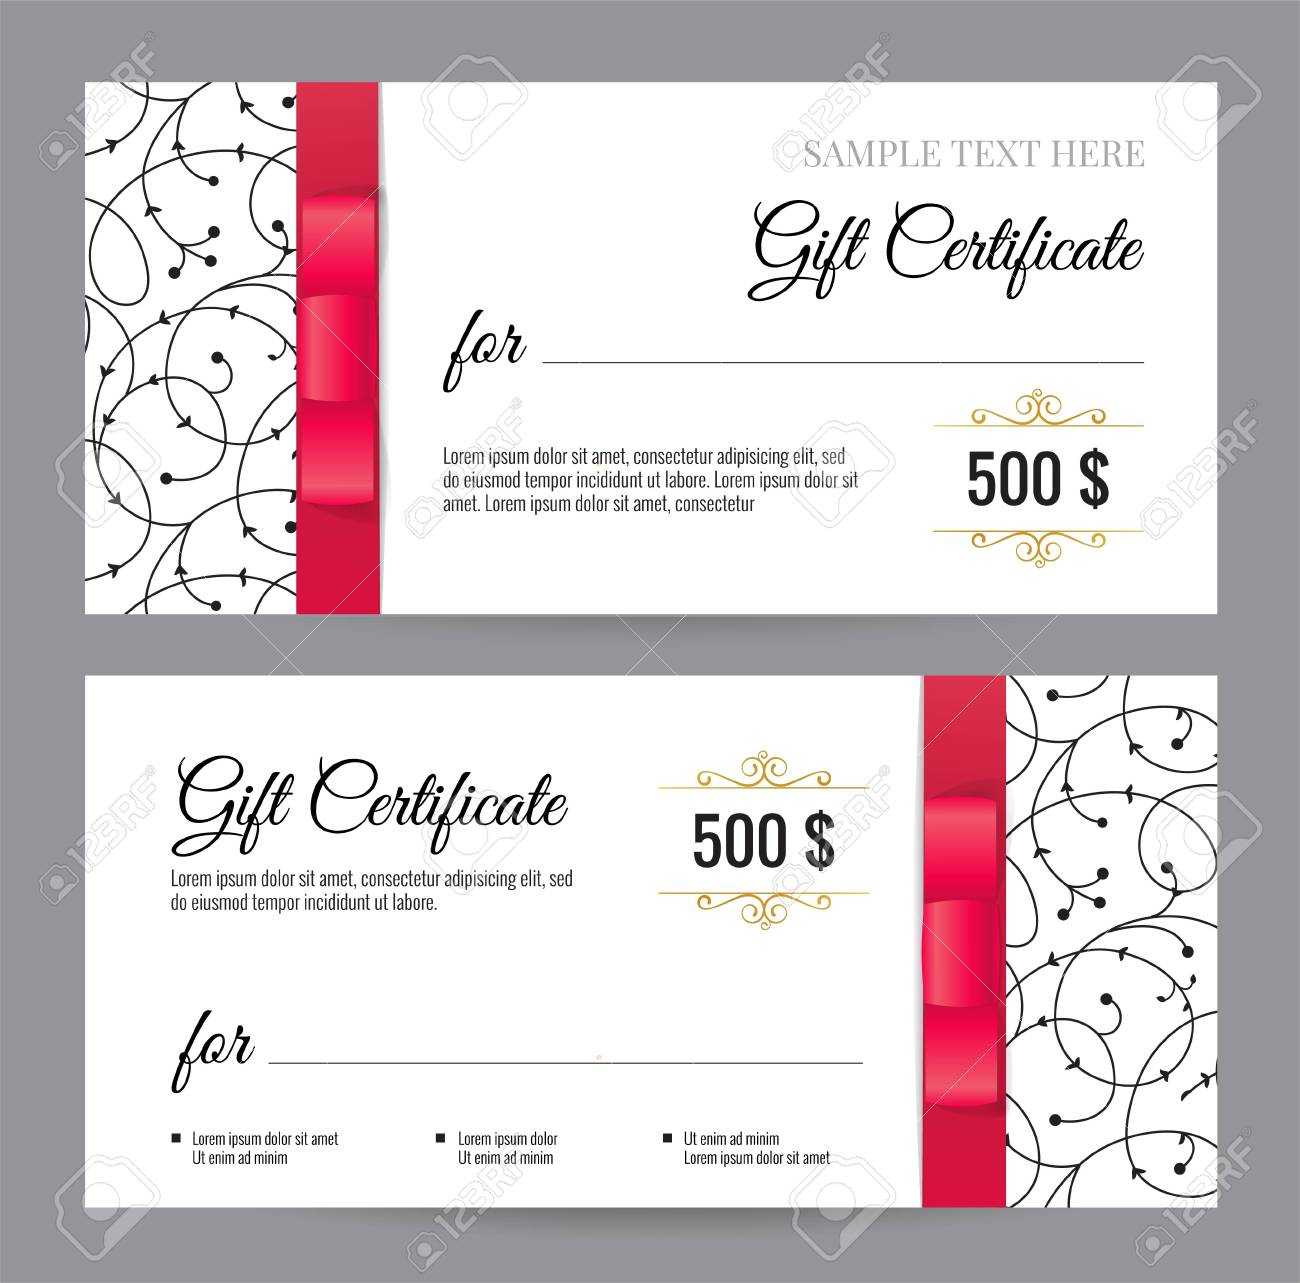 Black And White Gift Voucher Template With Floral Pattern And.. With Regard To Black And White Gift Certificate Template Free